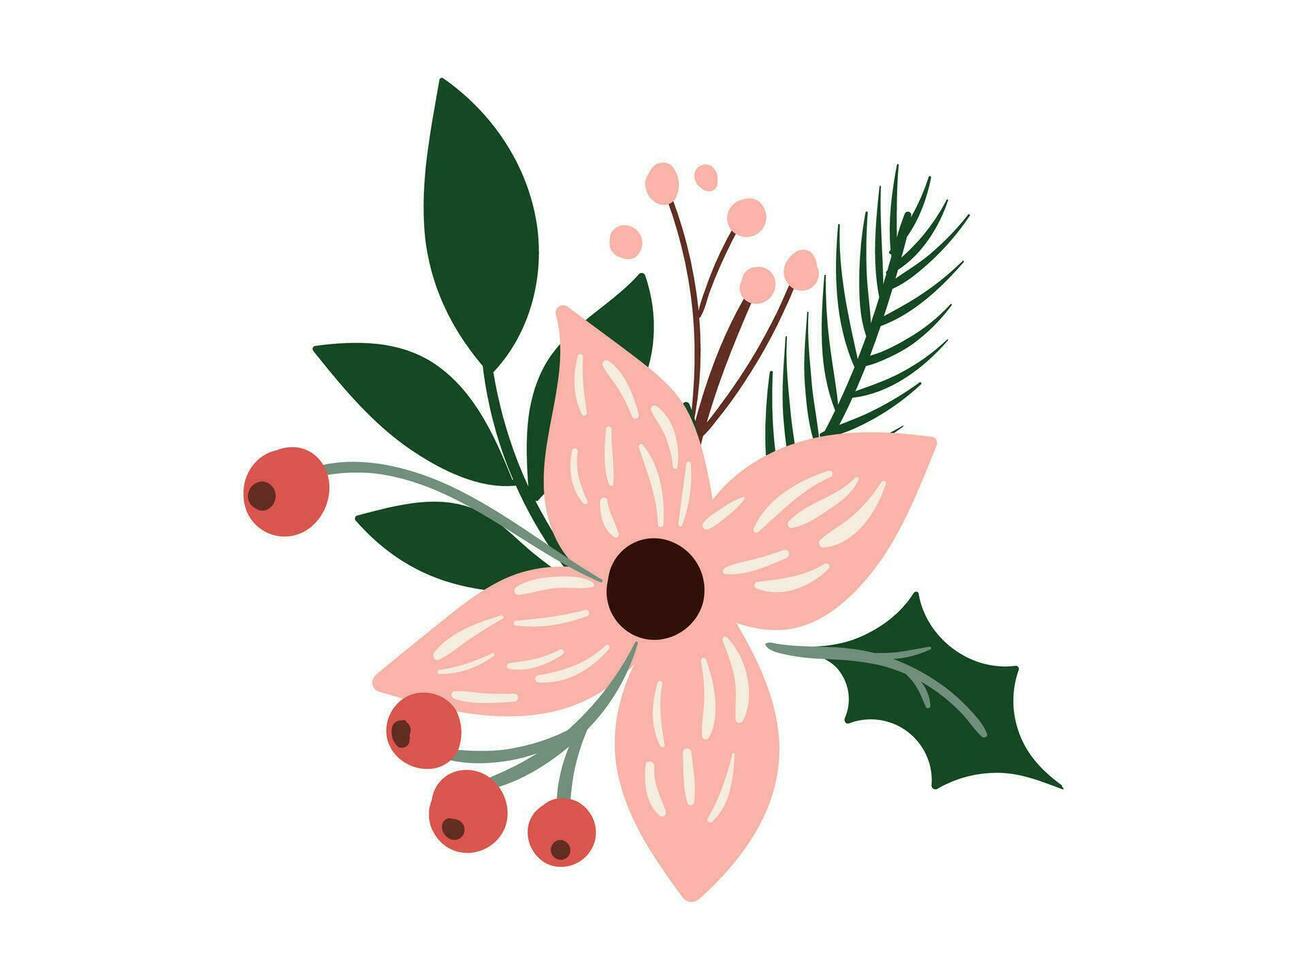 Floral Christmas Illustration Collection vector